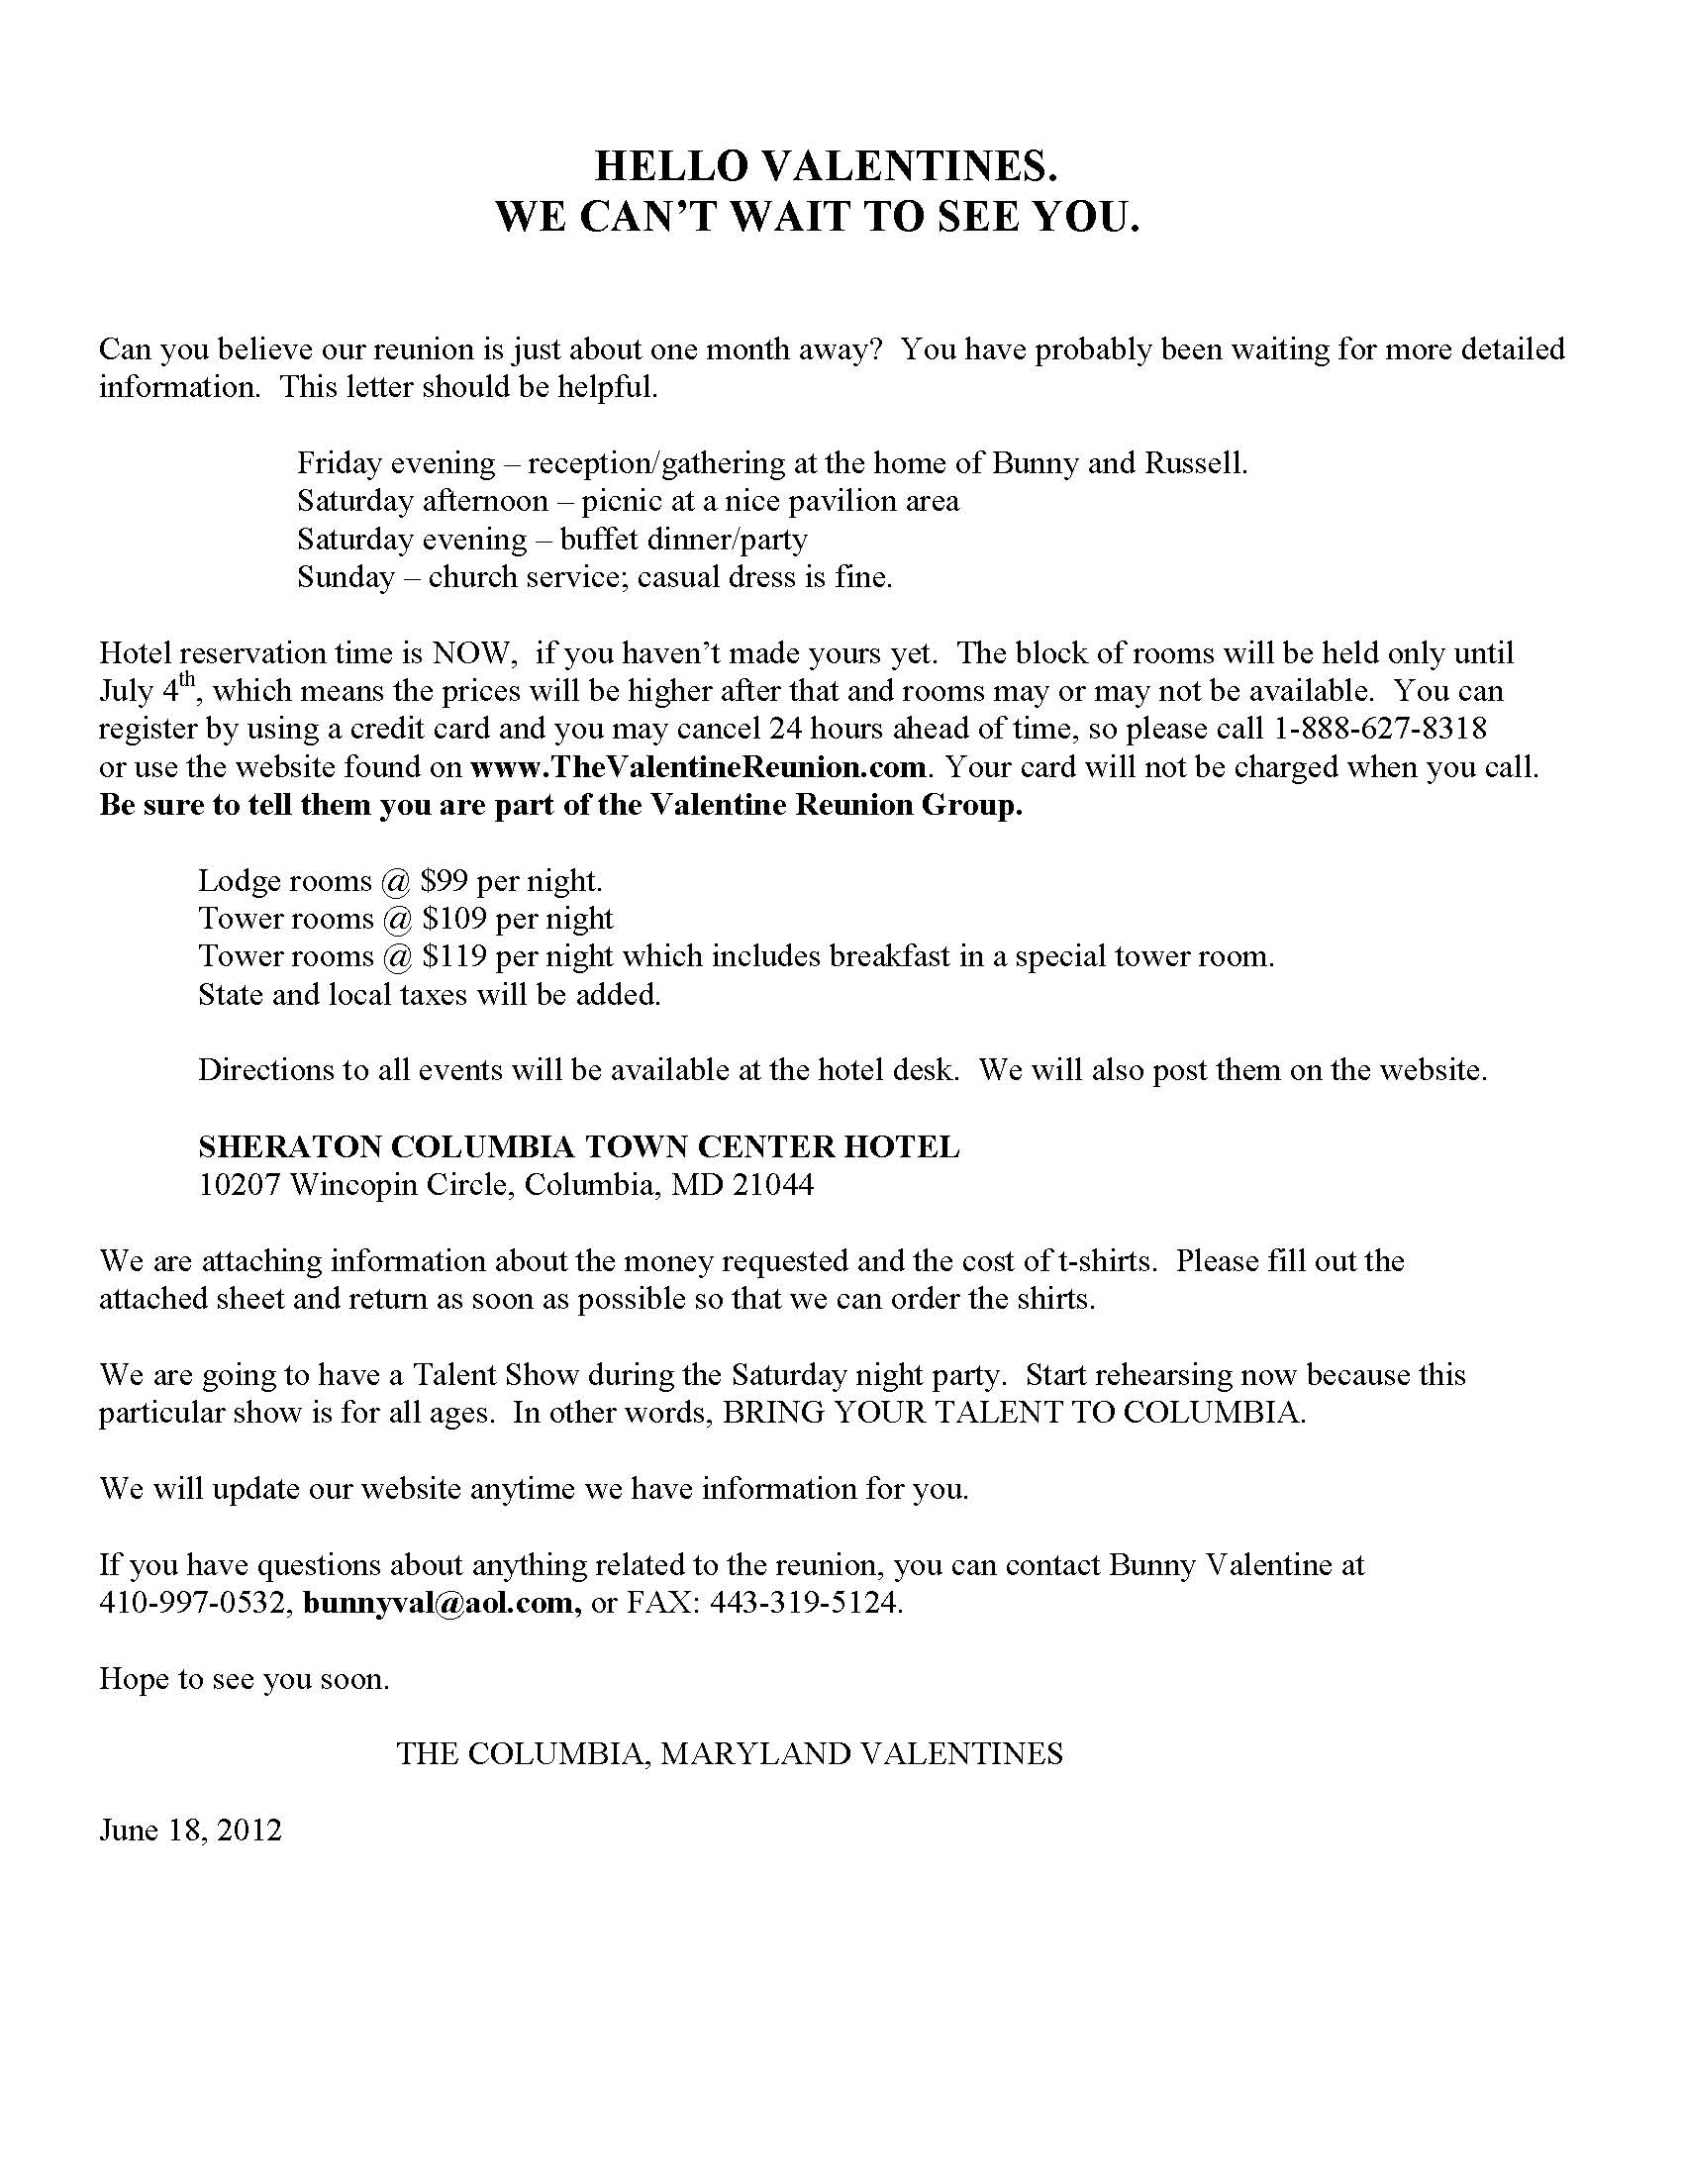 Family Reunion - Craig Valentine Pertaining To Family Reunion Letter Template